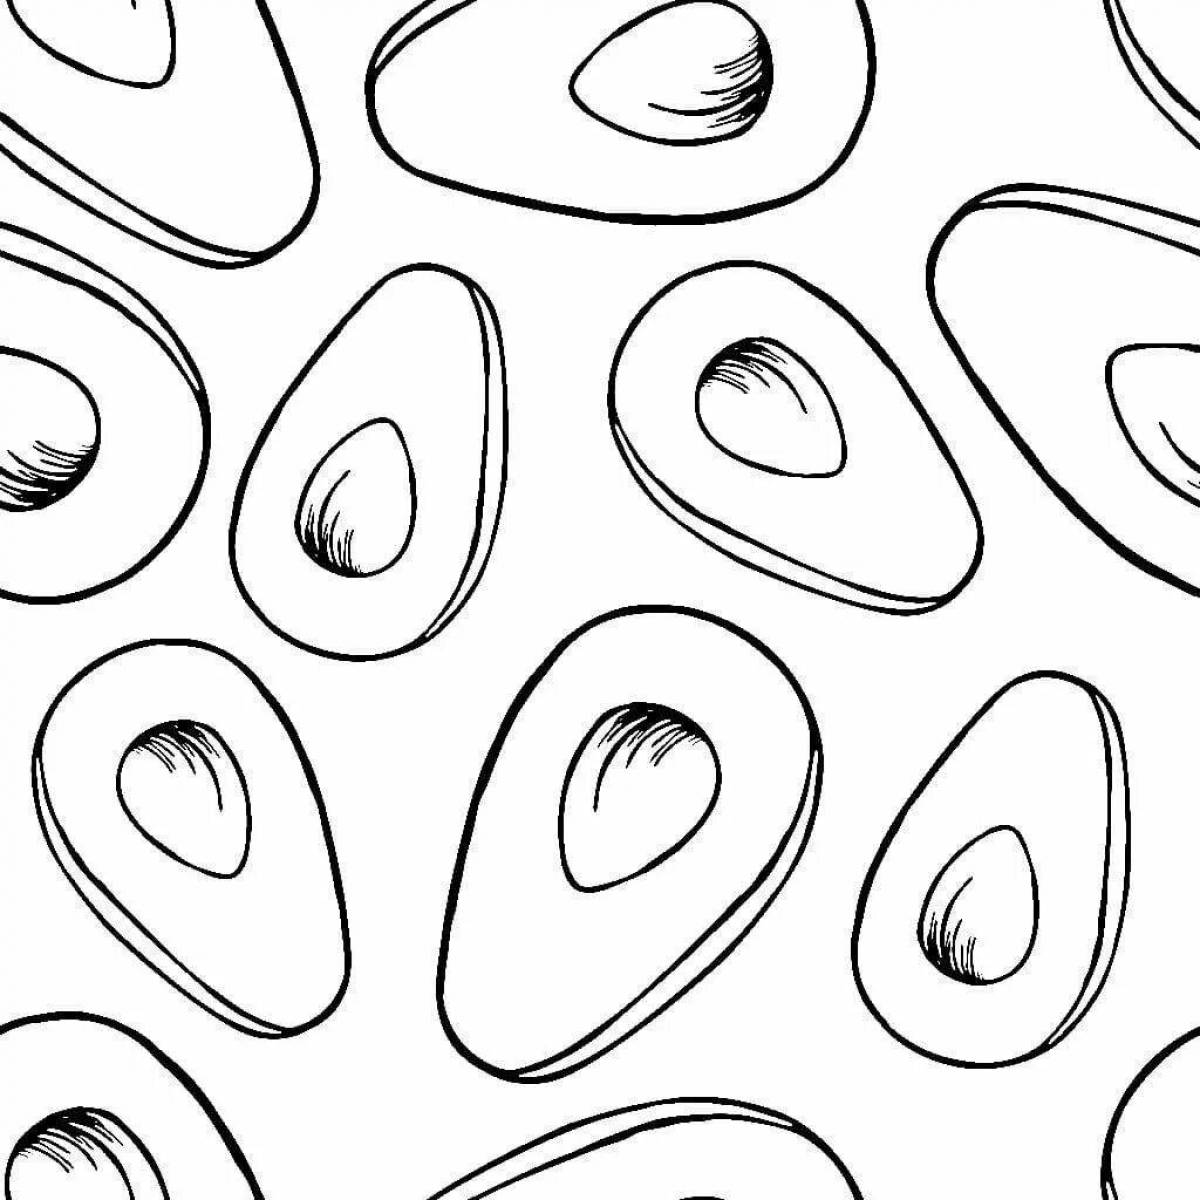 Blissful avocado coloring page